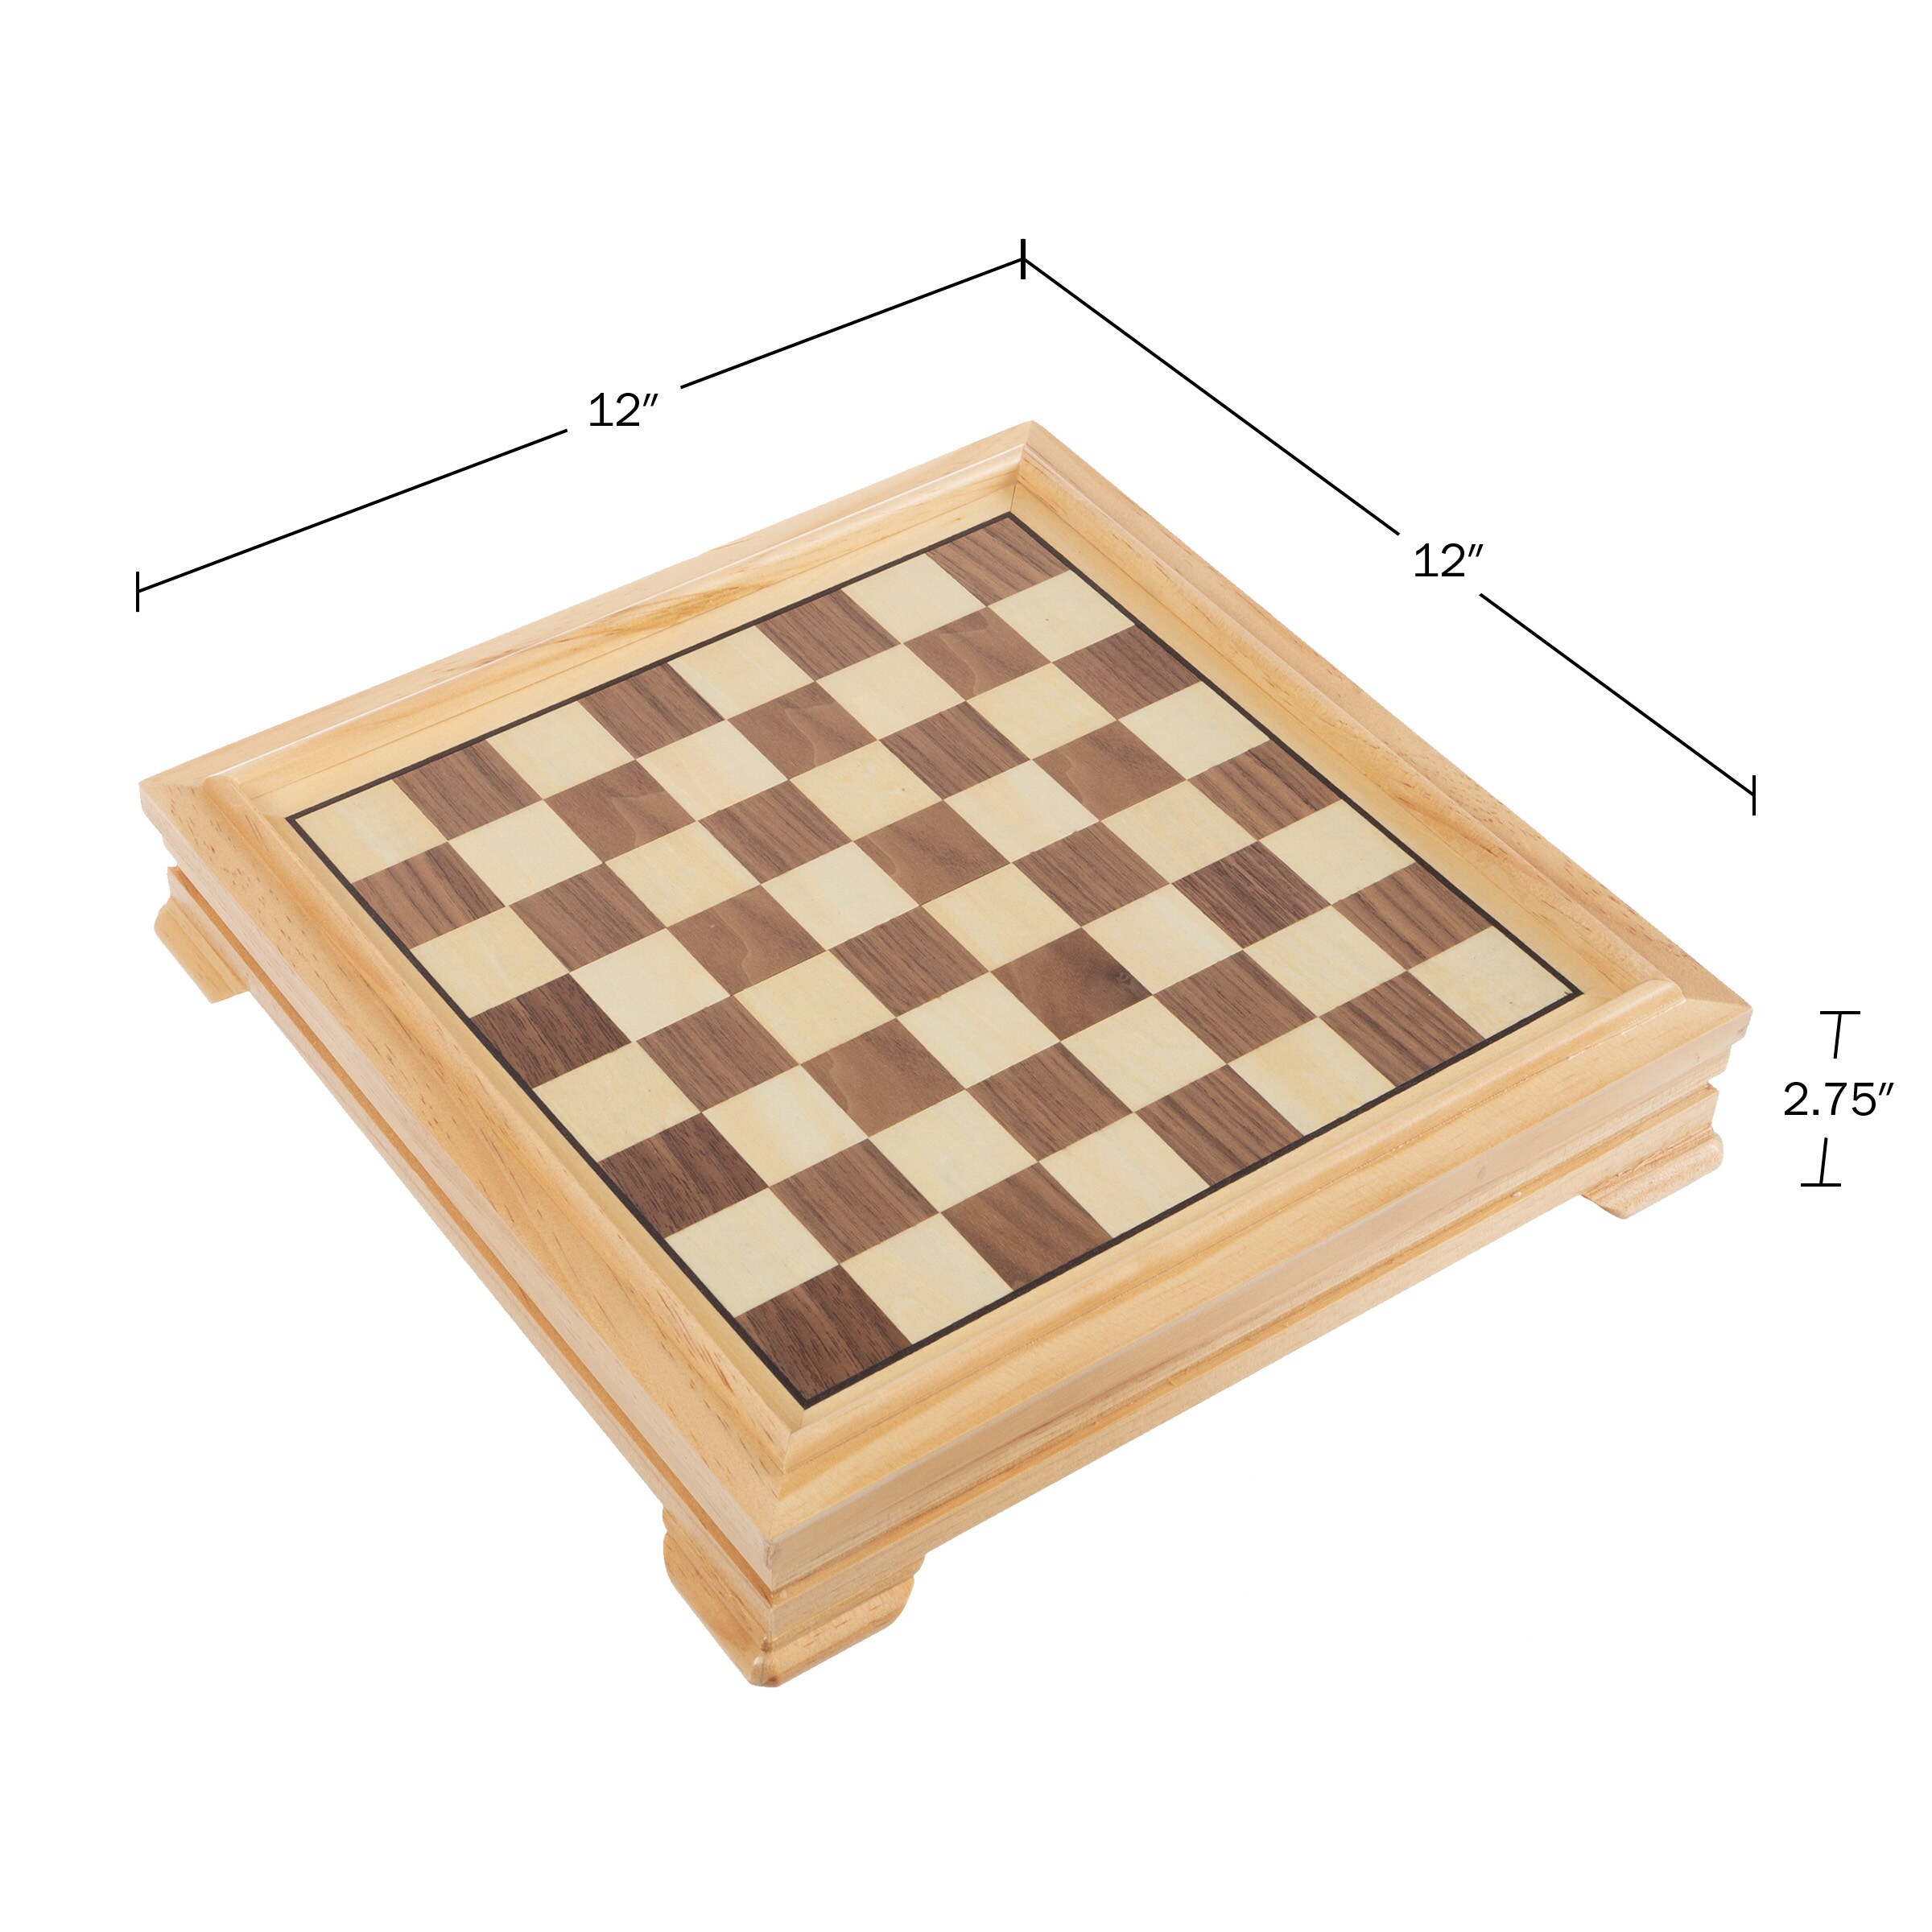 Classic Wooden Chess, Trivia & Strategy Board Games